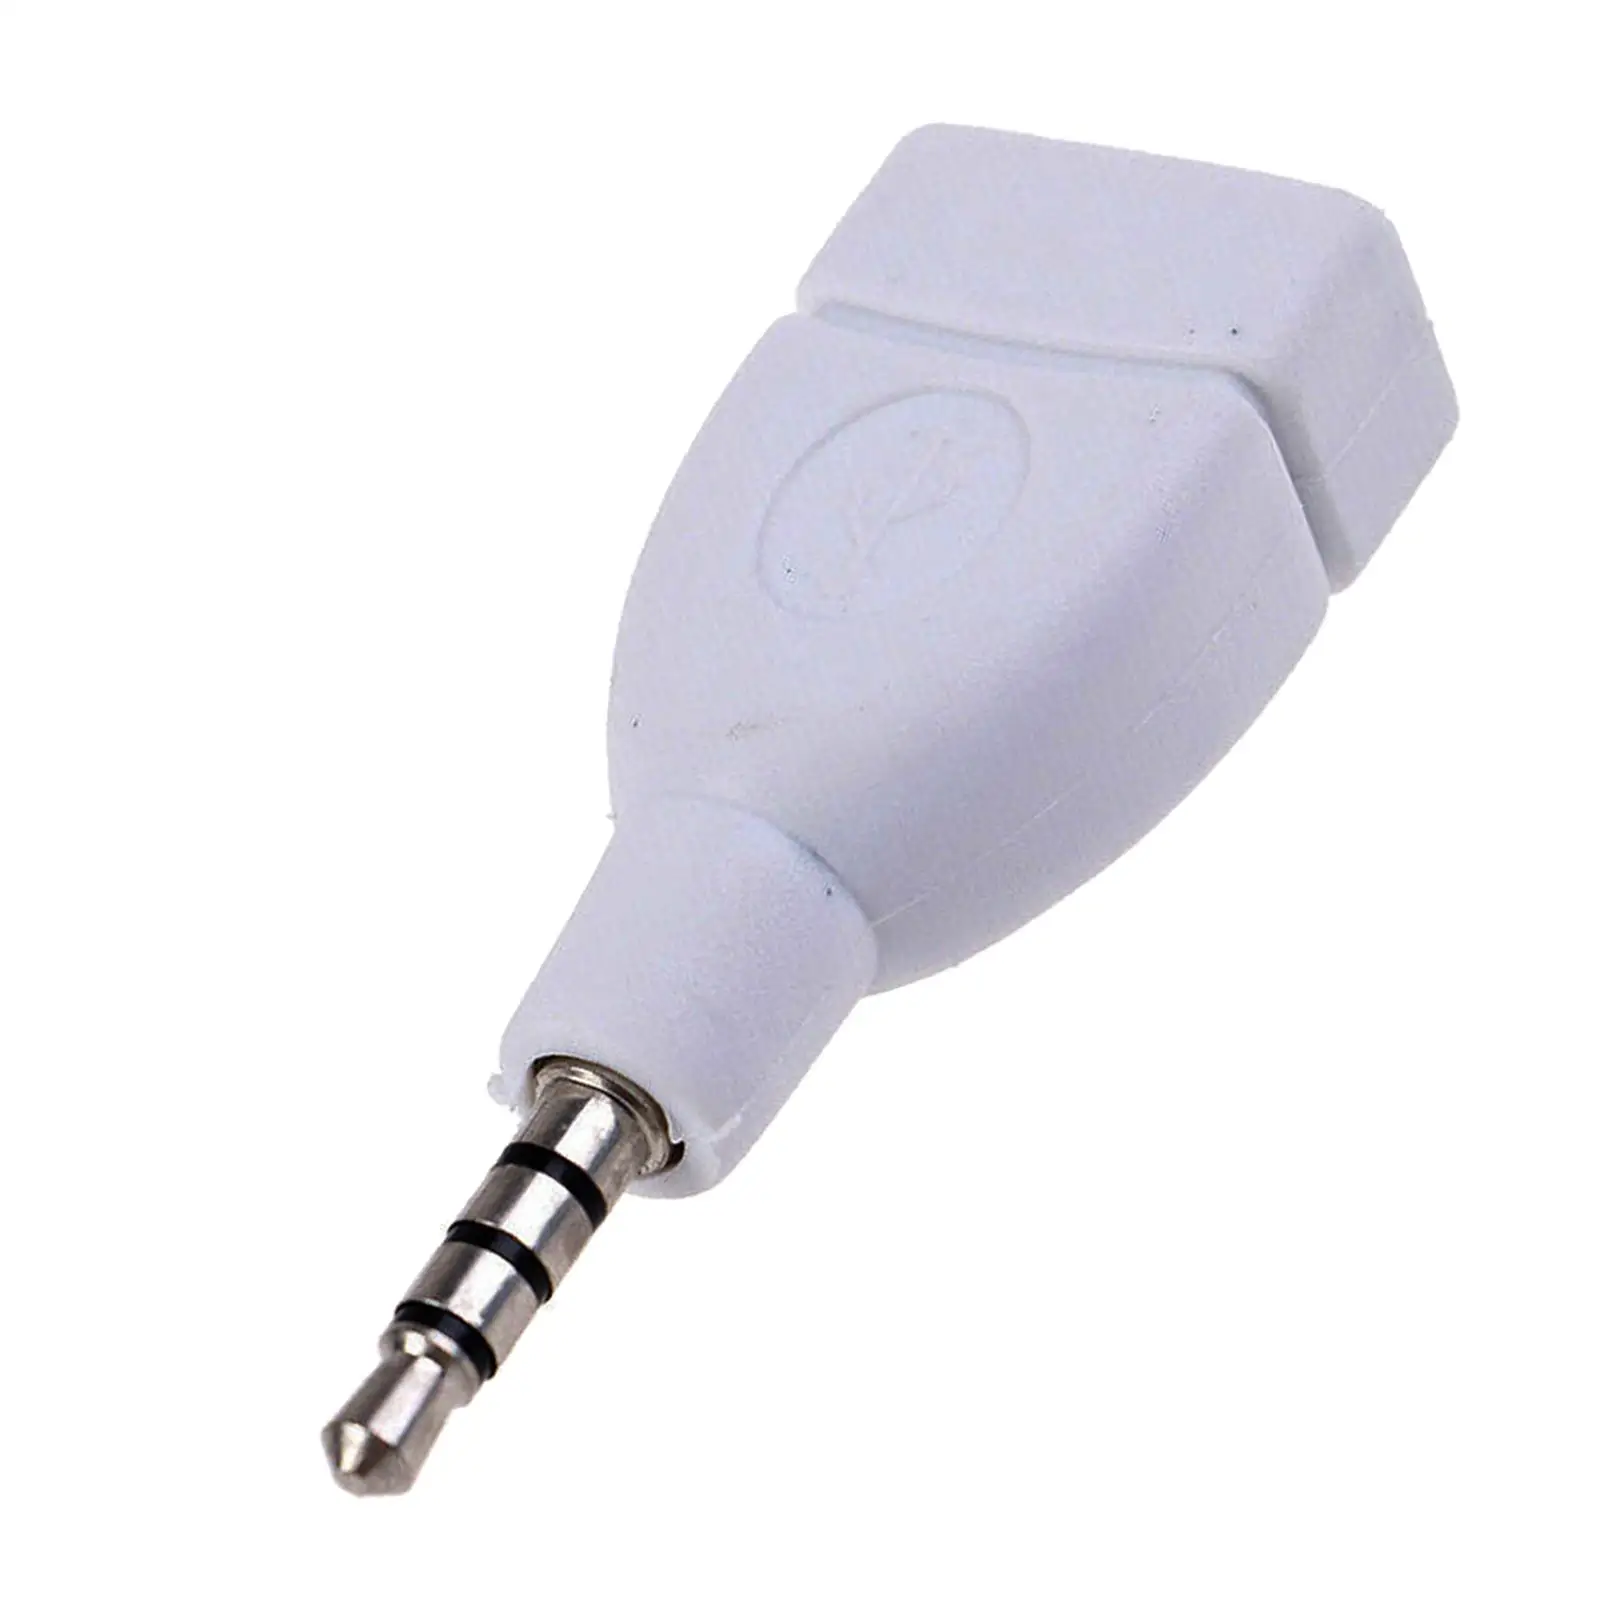 Auto 3.5mm Male AUX to USB 2.0 Adapter Plug AUX Audio Input MP3 from Disk Car Auxiliary Port Audio 